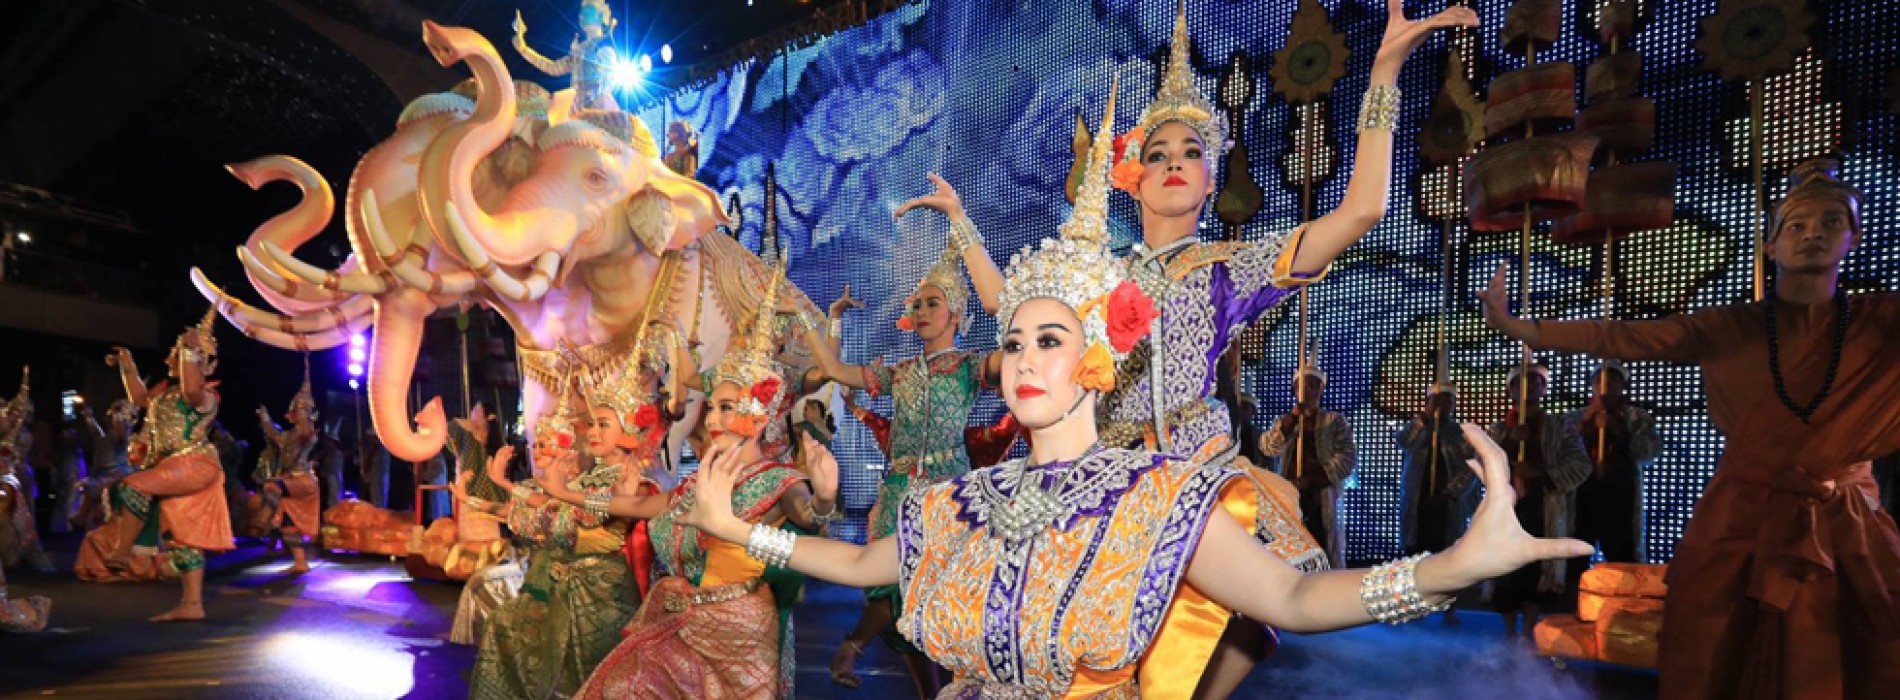 Over 300 travel agents, media discovered New Shades of Thailand on Mega Fam Trip